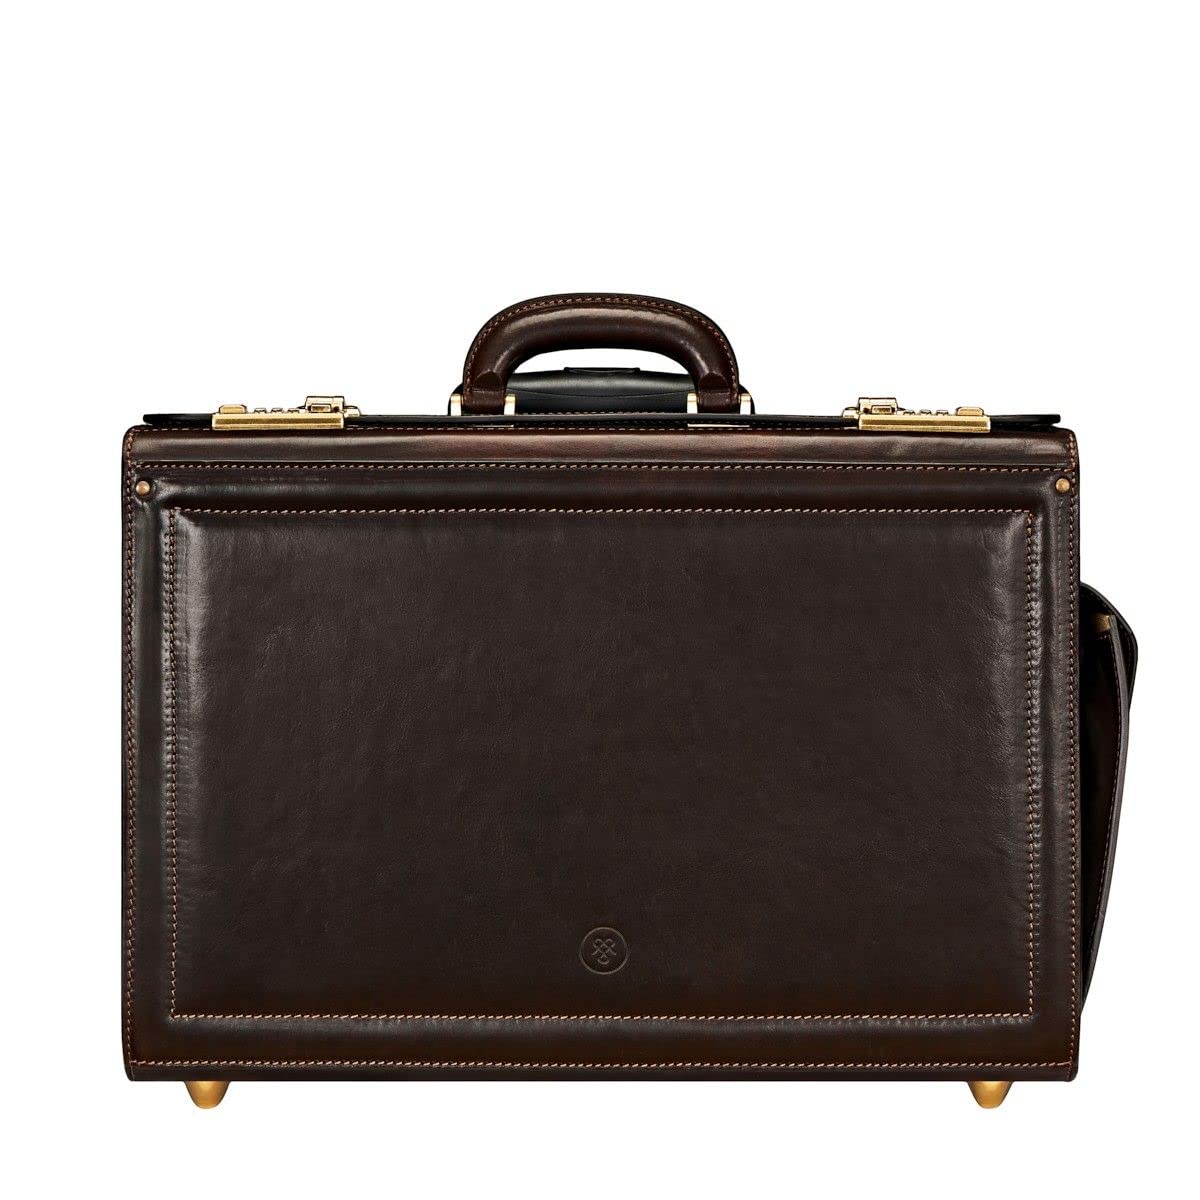 Maxwell Scott | Personalized Mens Luxury Leather Pilot/Catalog Attaché Case with Wheels | The VareseW | Classic Business Travel Bag | Dark Chocolate Brown